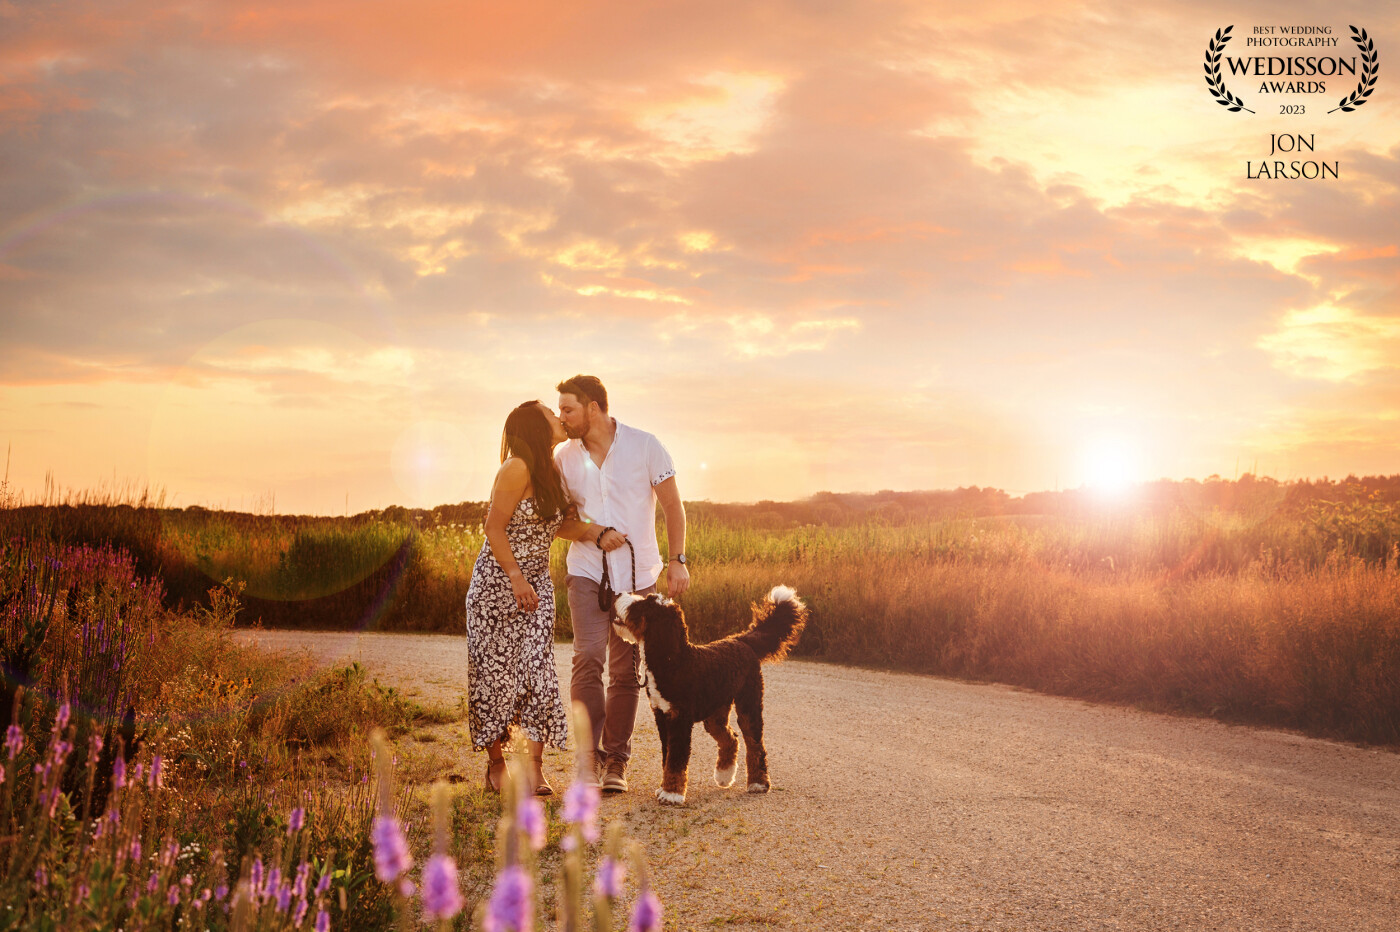 The dog and his humans were romantically linked during this sunset session.